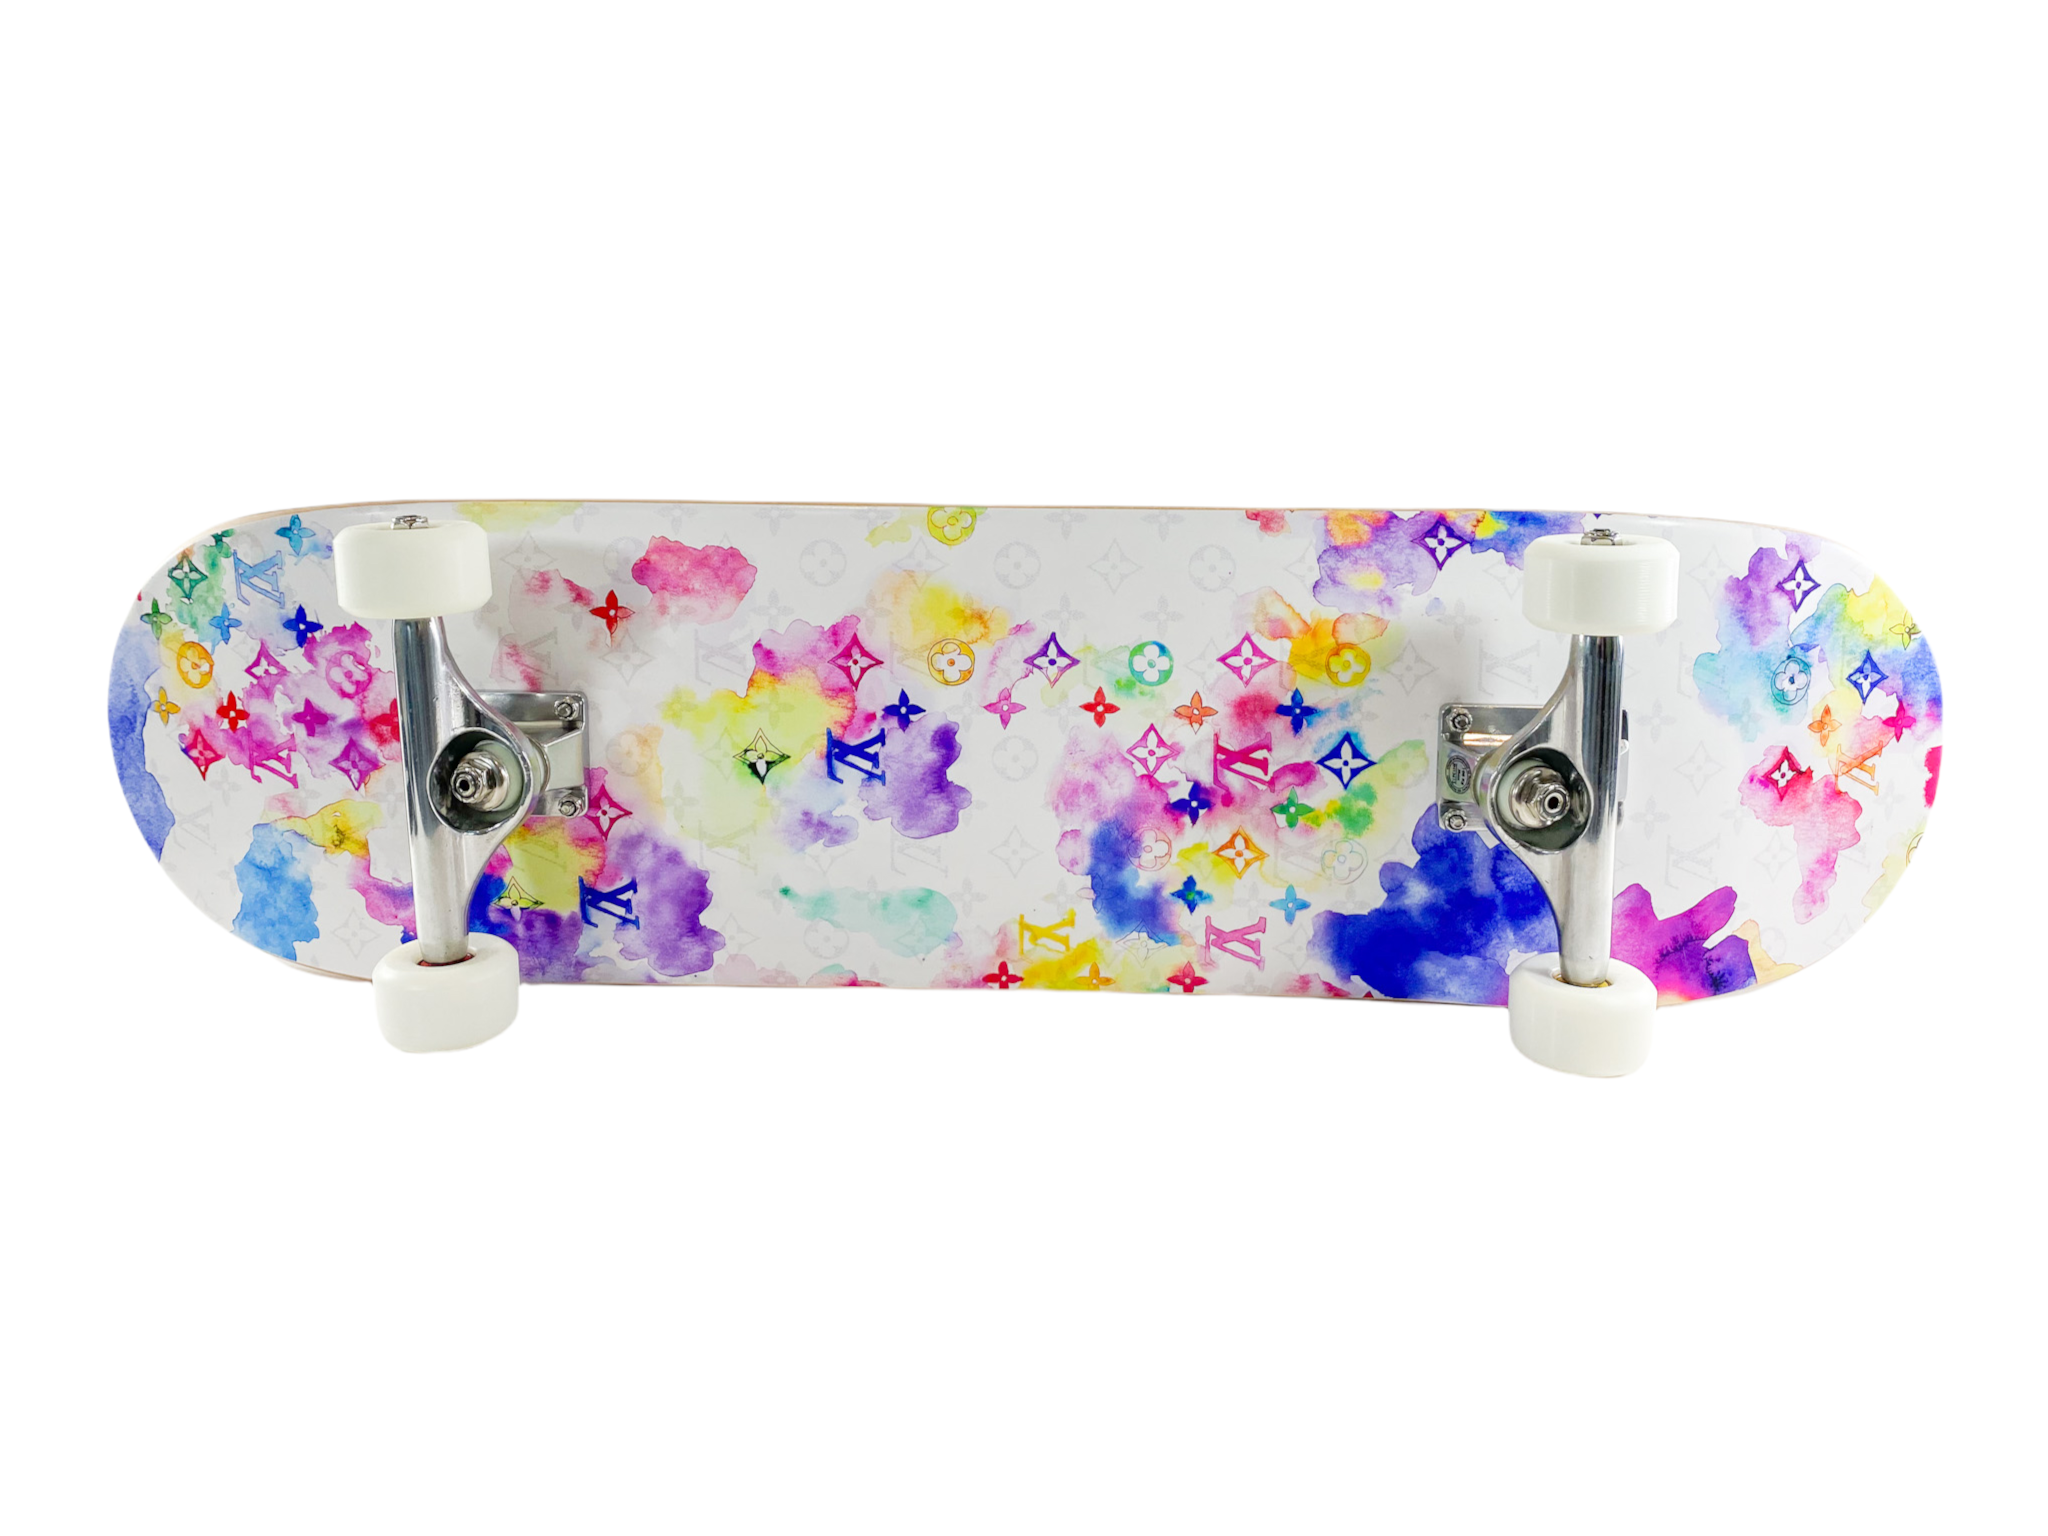 Louis Vuitton Water Color Skateboard – Consign of the Times ™